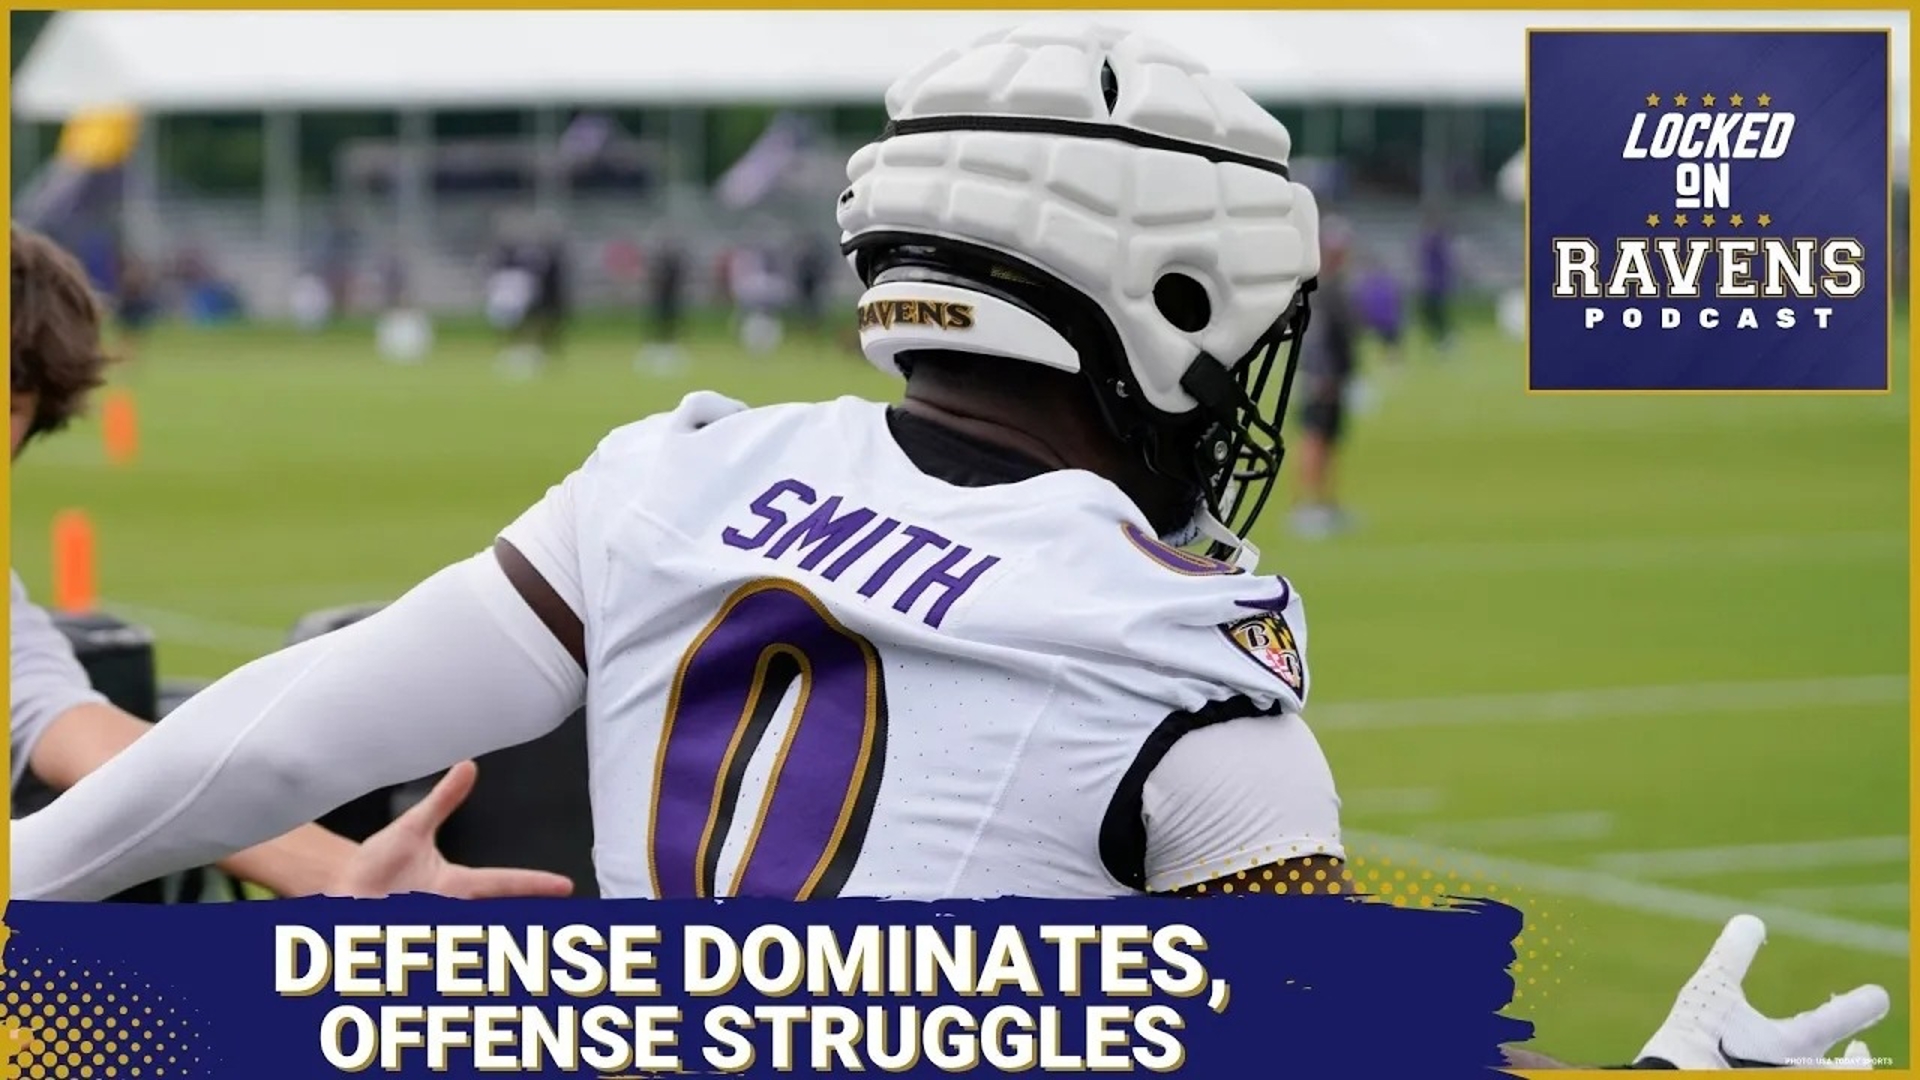 We look at Day 1 of Baltimore Ravens minicamp, looking at how the defense shined, the offense struggled and more.